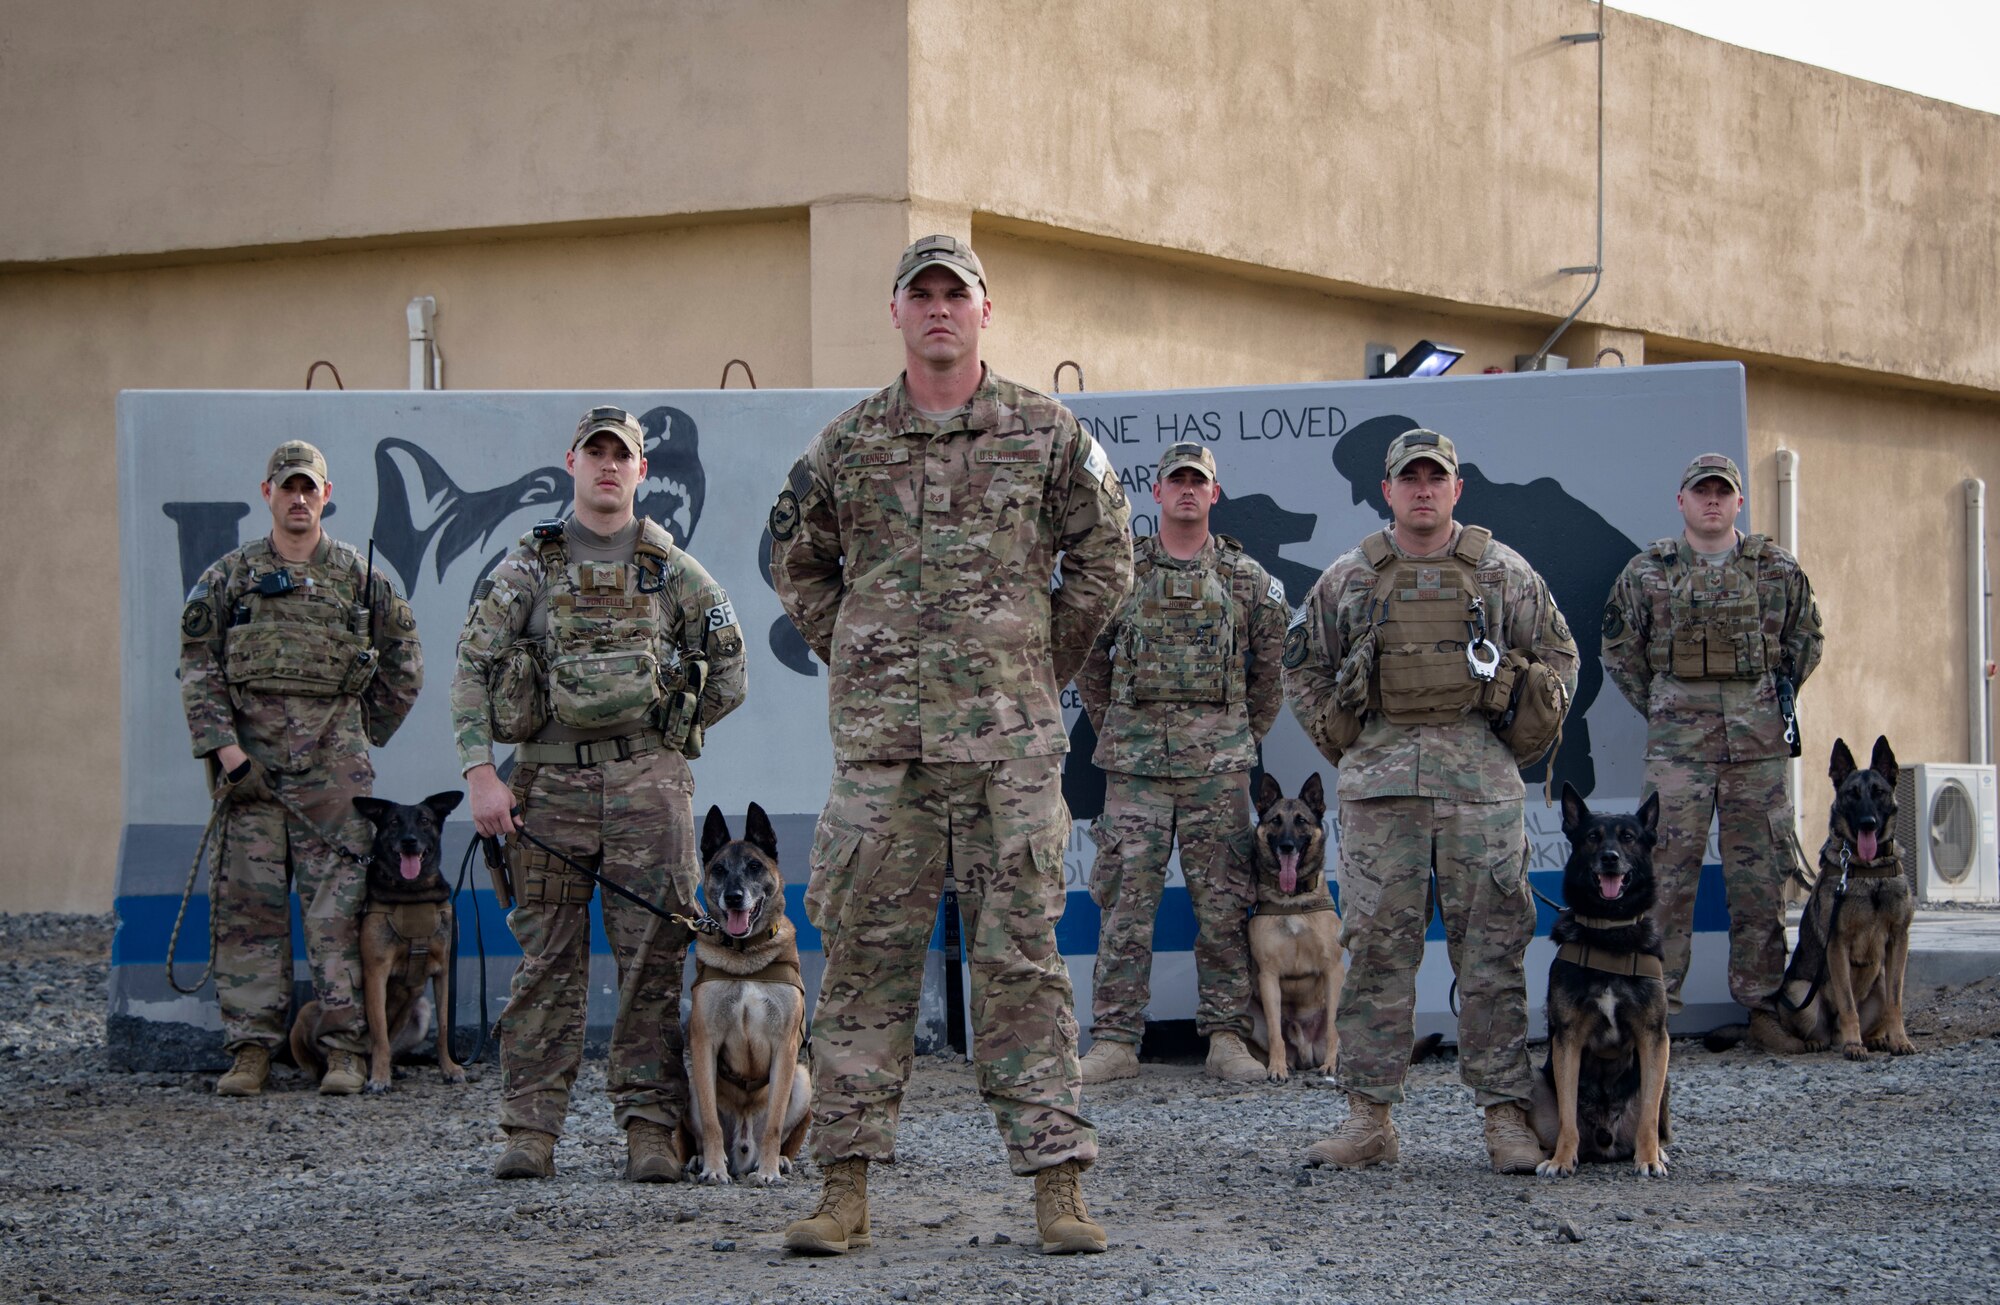 From left to right: U.S. Air Force Military Working Dog Handlers Staff Sgt. Brandon Ouderkirk, Staff Sgt. Carmen Pontello, Staff Sgt. Jeffrie Kennedy, Staff Sgt. Cody Howey, Staff Sgt. Dustin Reed, and Staff Sgt. Patrick Cushing pose for a group photo with their military working dogs, Kon-ga, Max, Eros, Szuli, and Tuko at the 380th Air Expeditionary Squadron K-9 facility, Al Dhafra Air Base, United Arab Emirates, May 15, 2018. (U.S. Air National Guard photo by Tech. Sgt. Nieko Carzis)